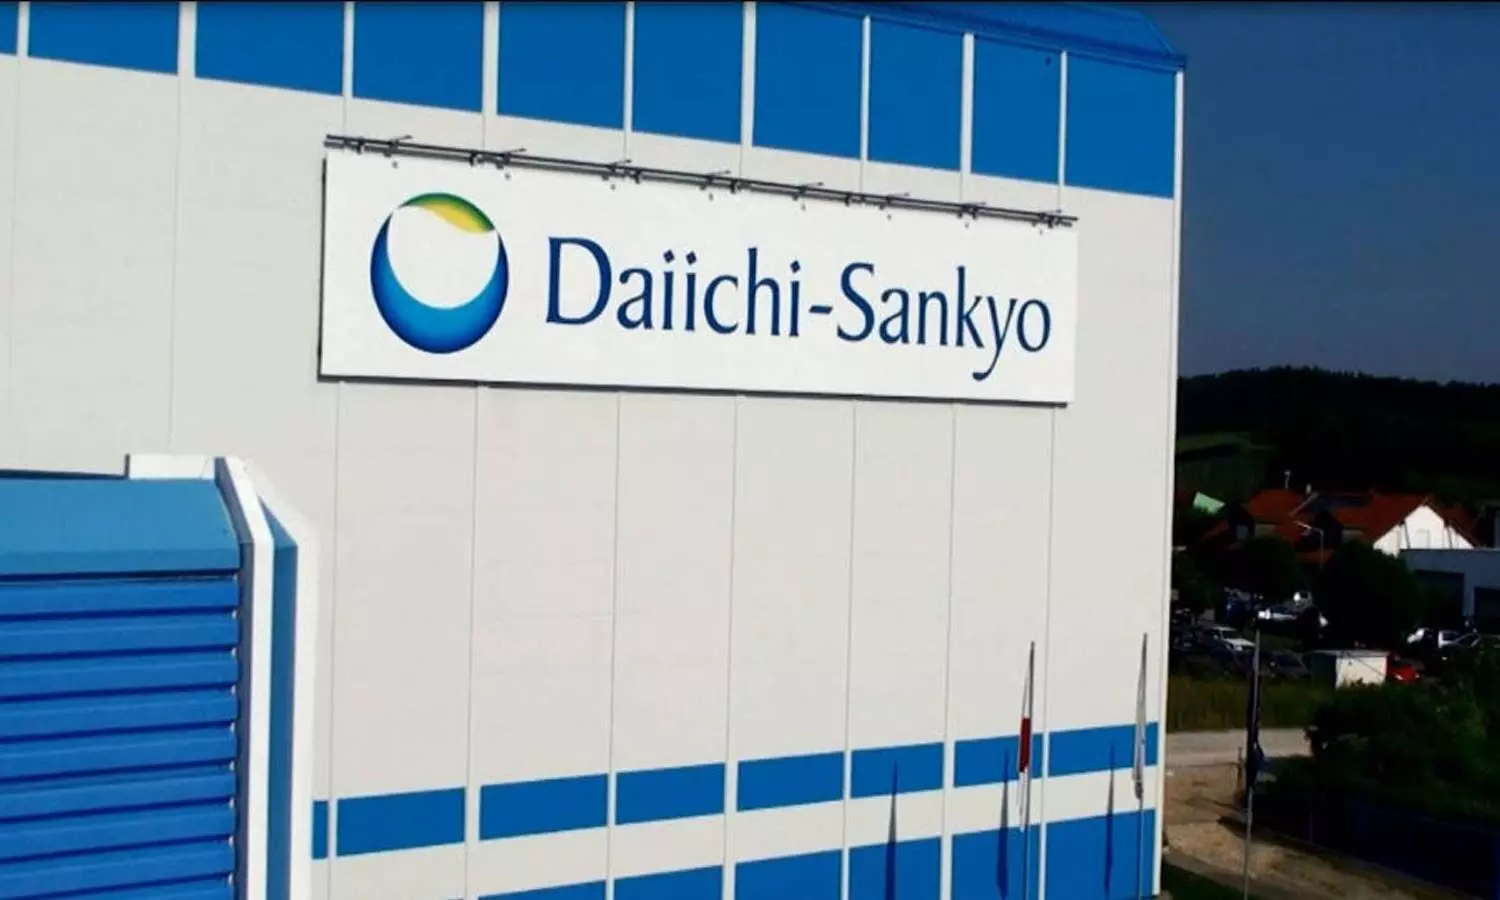 Daiichi Sankyo Launches ENHERTU in Japan for Patients with HER2 Positive Unresectable or Metastatic Breast Cancer